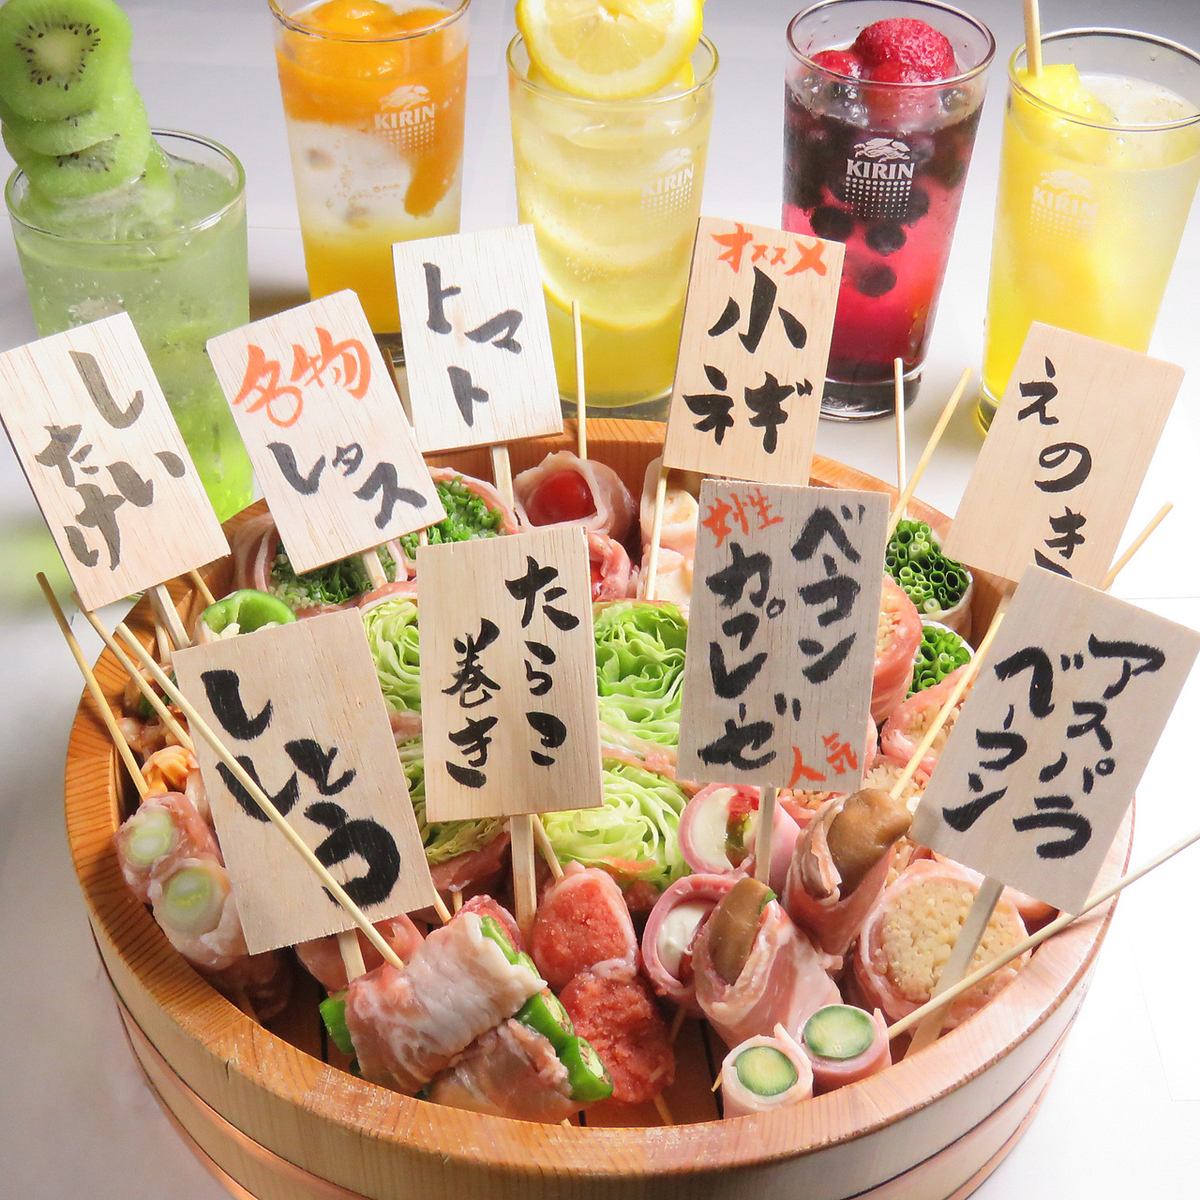 All-you-can-drink for 1,000 yen!